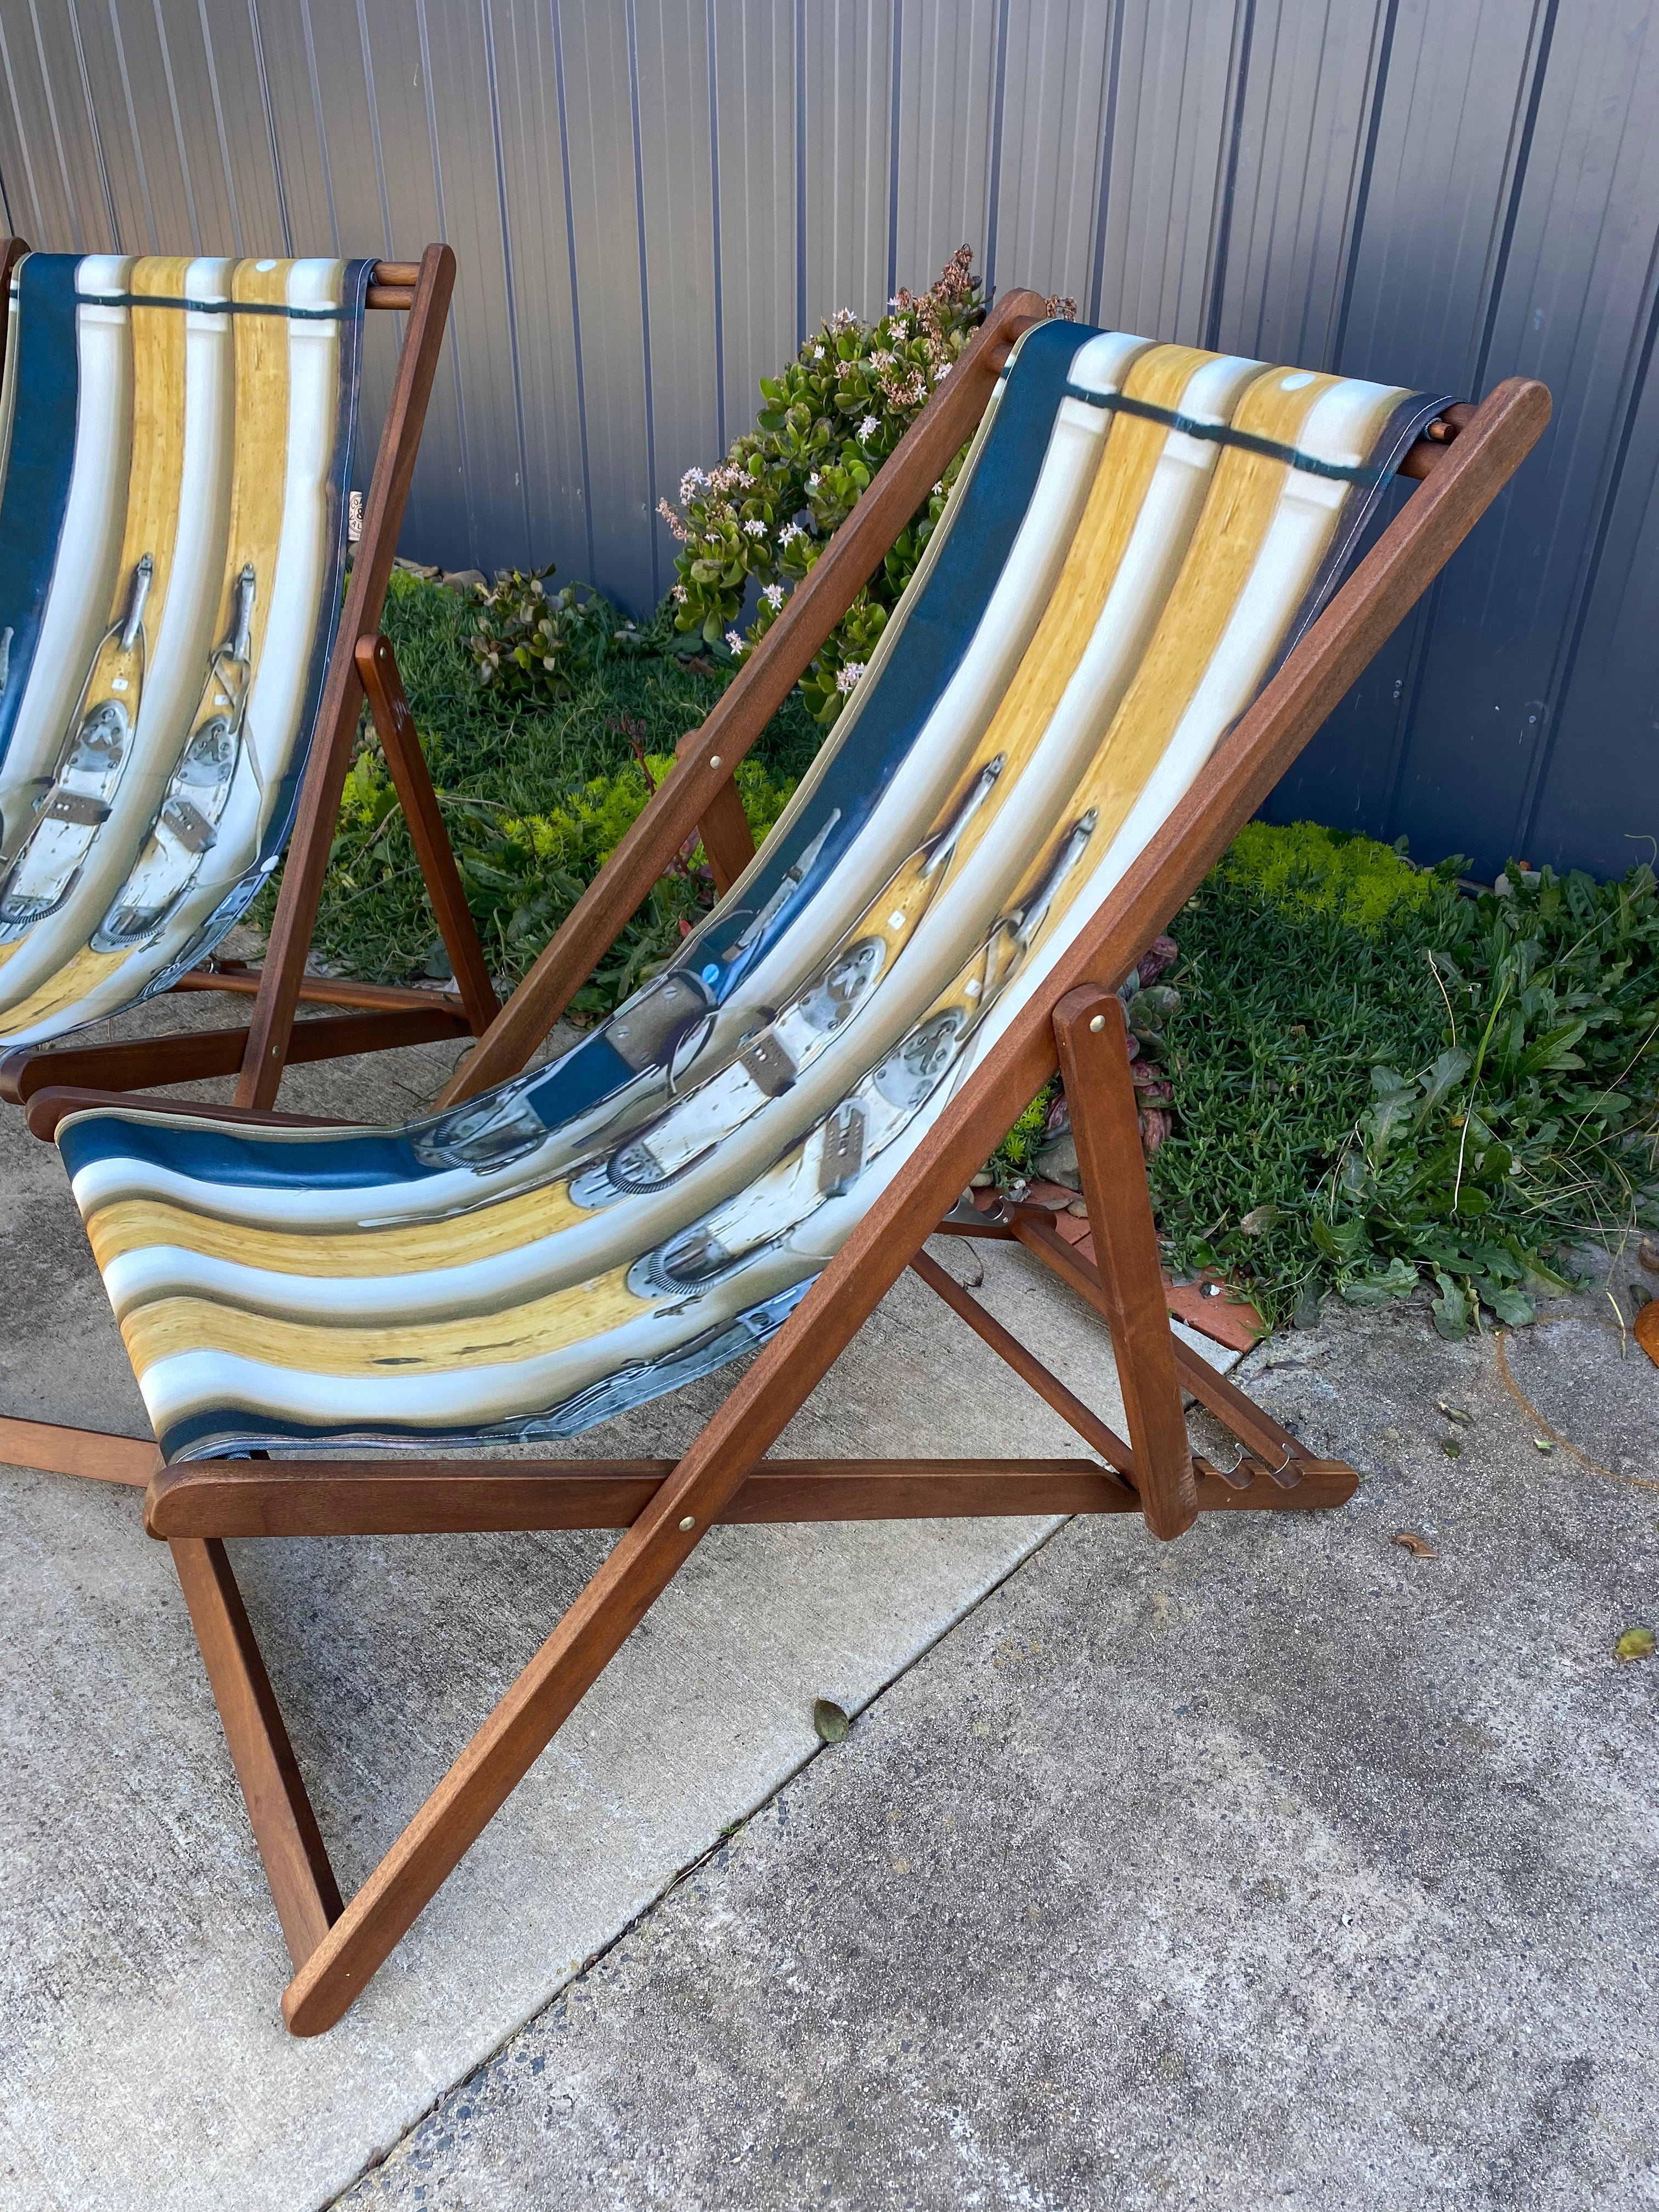 Side View. Pair of Coast & Valley Deck Chairs: Vintage Ski design showing 2 pairs of vintage wooden skis with bindings. On a concrete floor against a blue steel shed and door with garden bed in the background Edit alt text